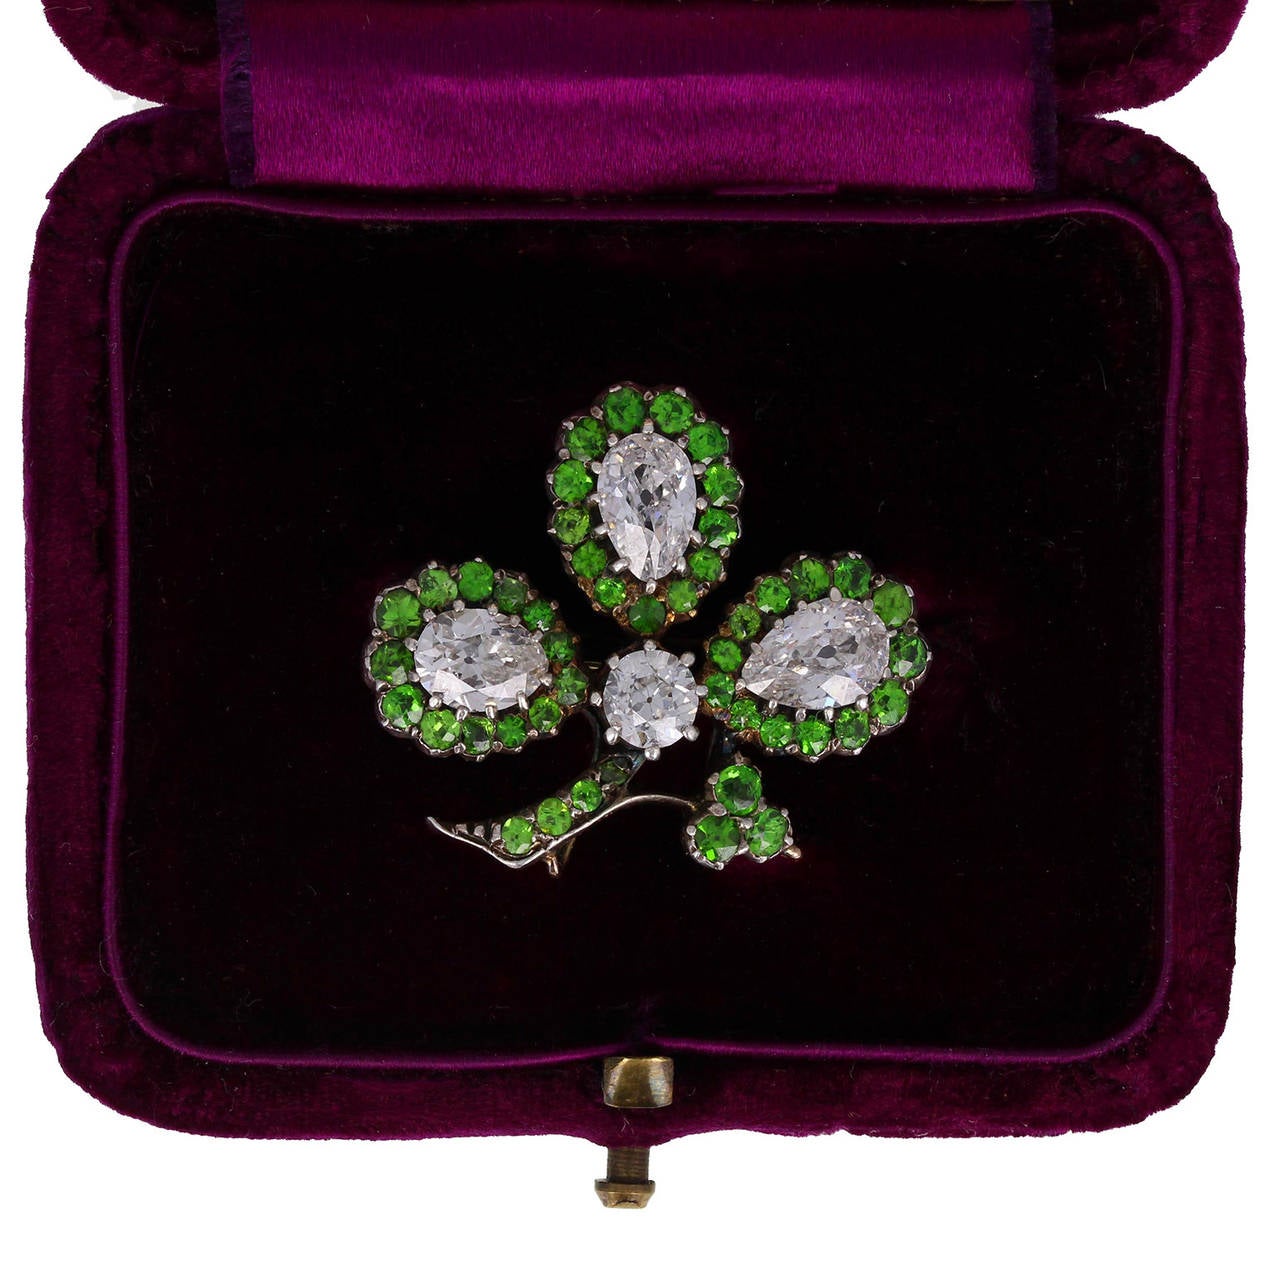 A floral brooch featuring 1.50 carats of very rare round-cut, bright, vivid green garnets bordering three pear-shaped diamonds to form three leaves to a central old-cut diamond extending from a branch. Total diamond weight from four diamonds of 1.80